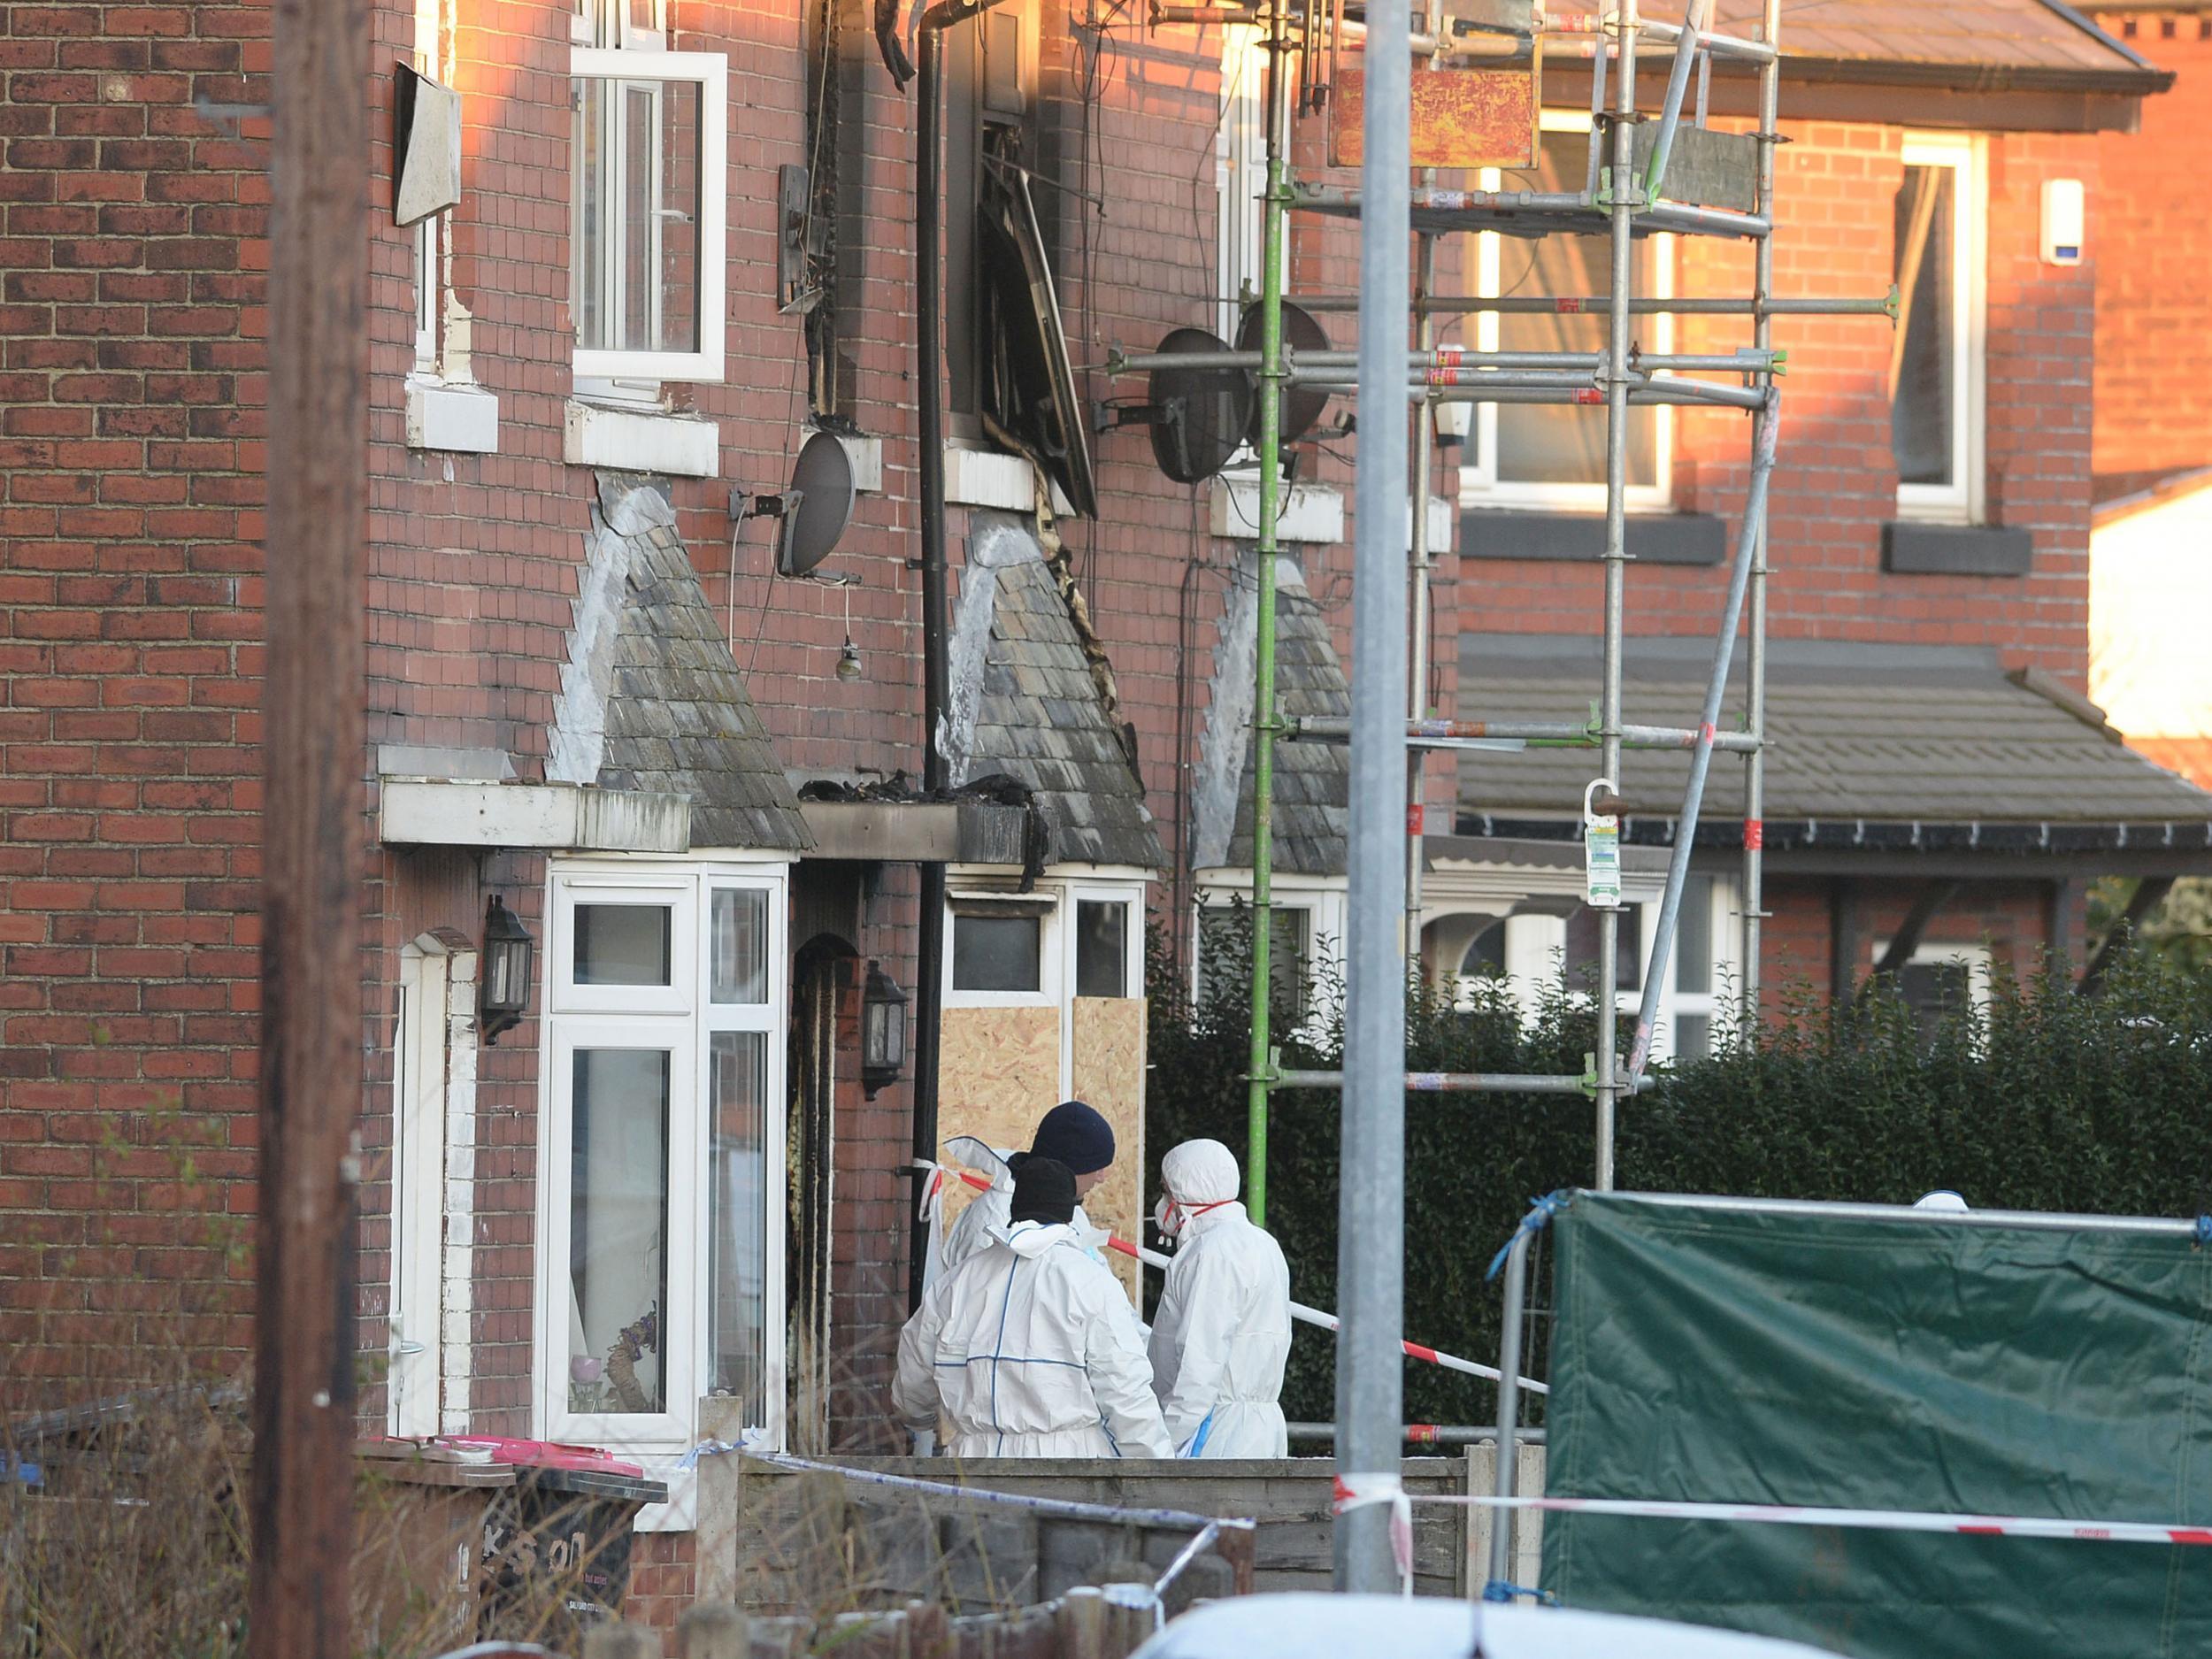 Forensic officers at the scene of the house fire Walkden, Salford